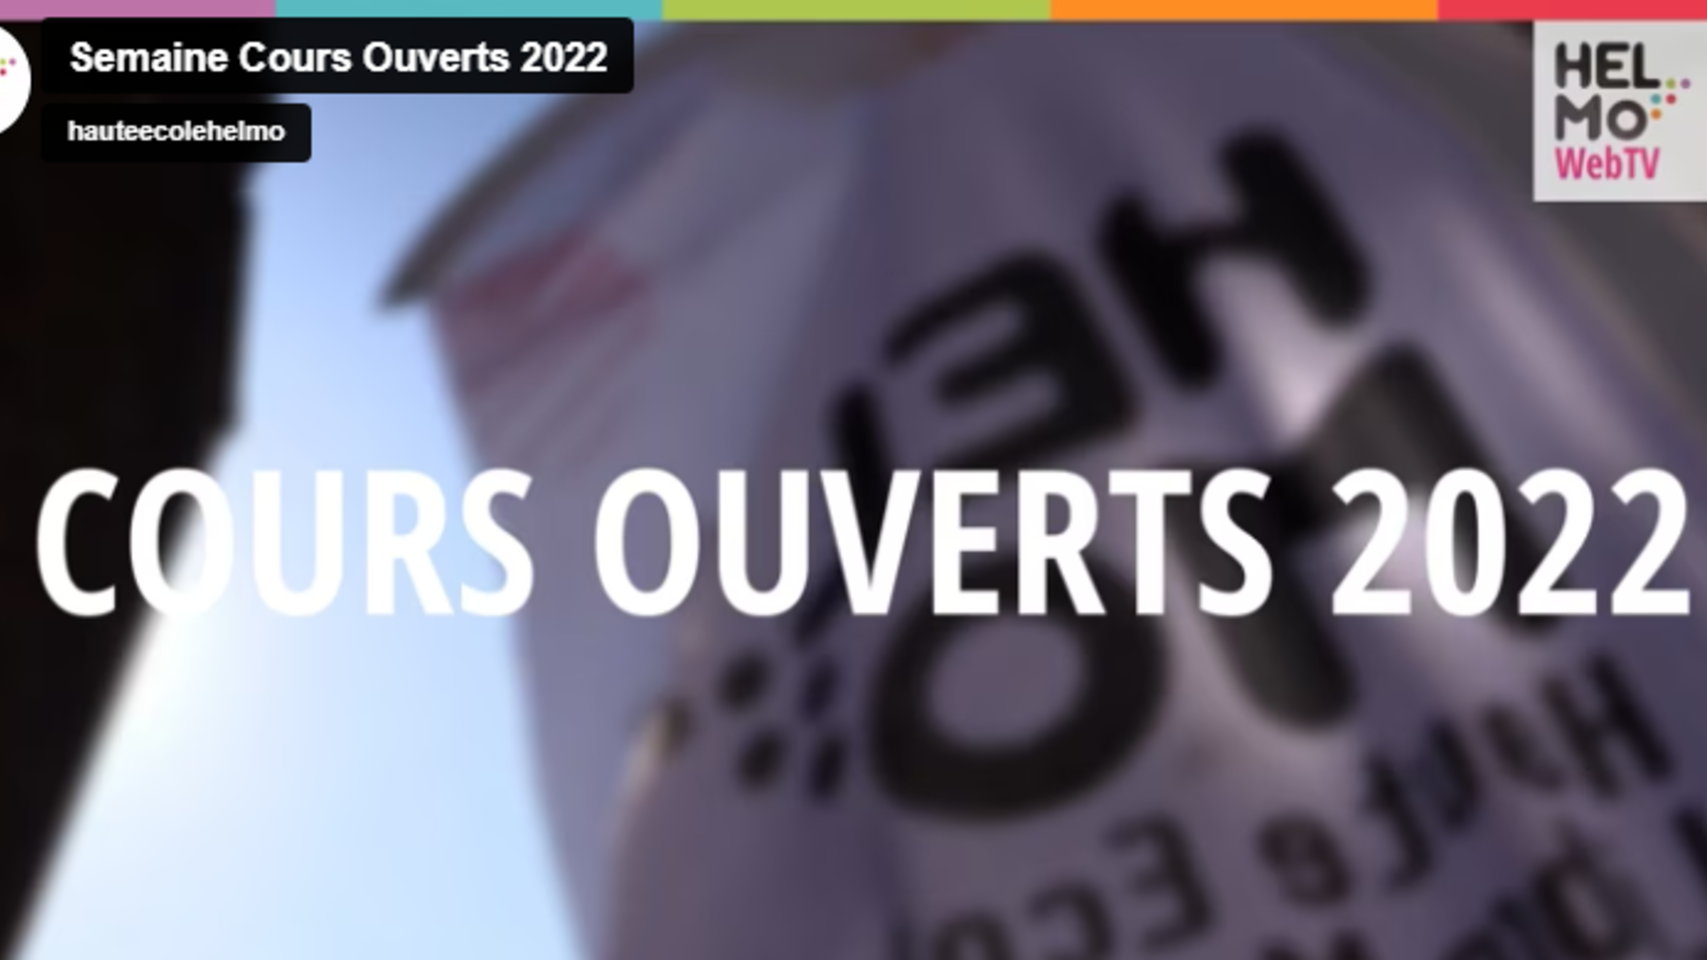 SEMAINE COURS OUVERTS 2022